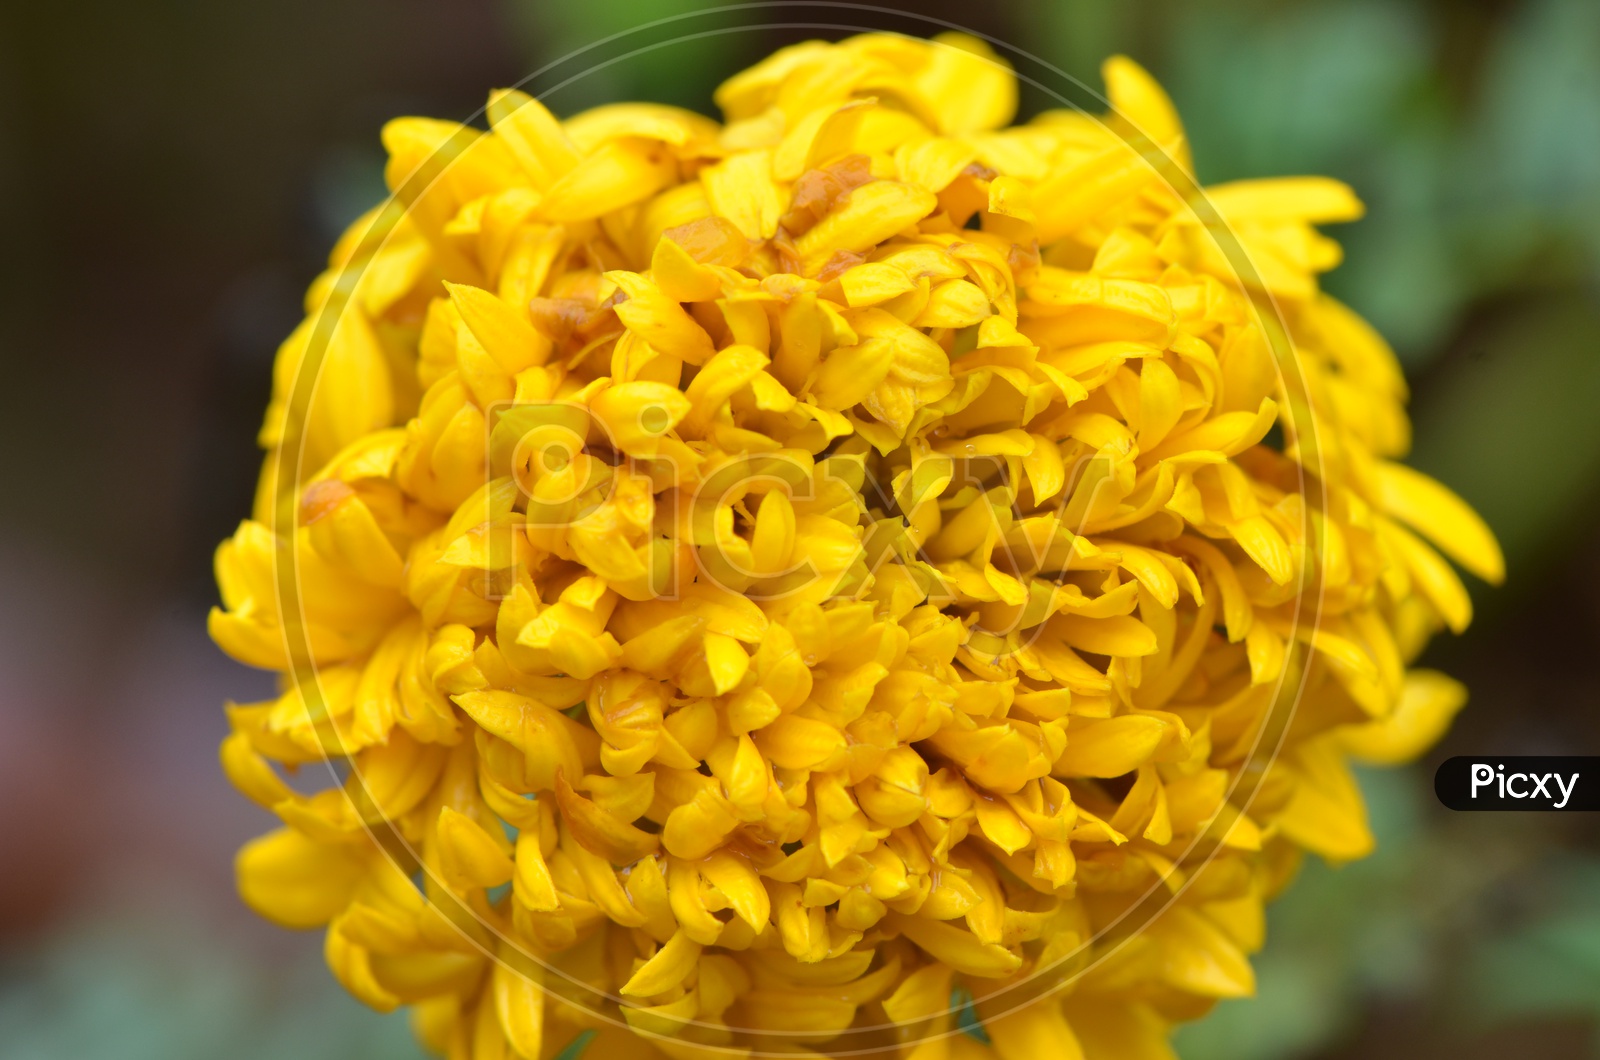 Marigold Flower Blooming Closeup on plant in a Harvesting Field